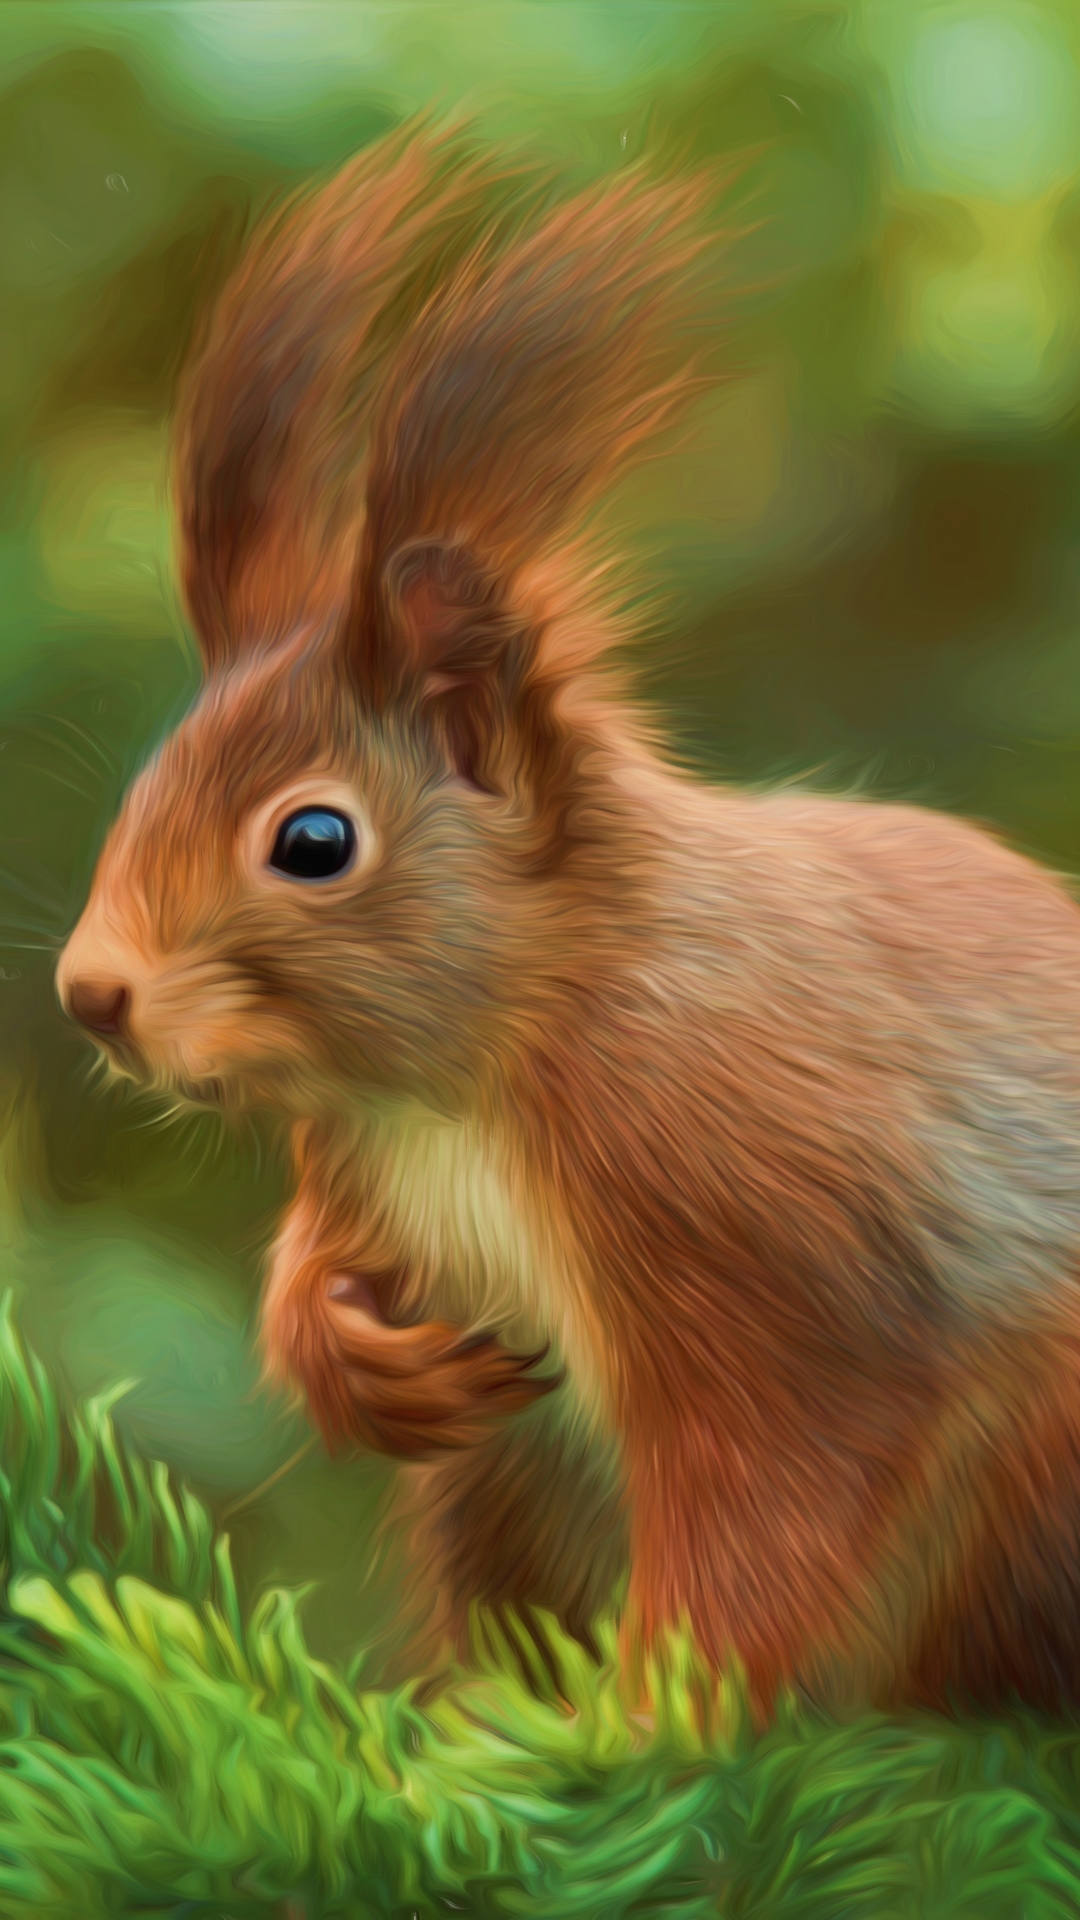 A Squirrel done with an oil paint filter by Hans Benn